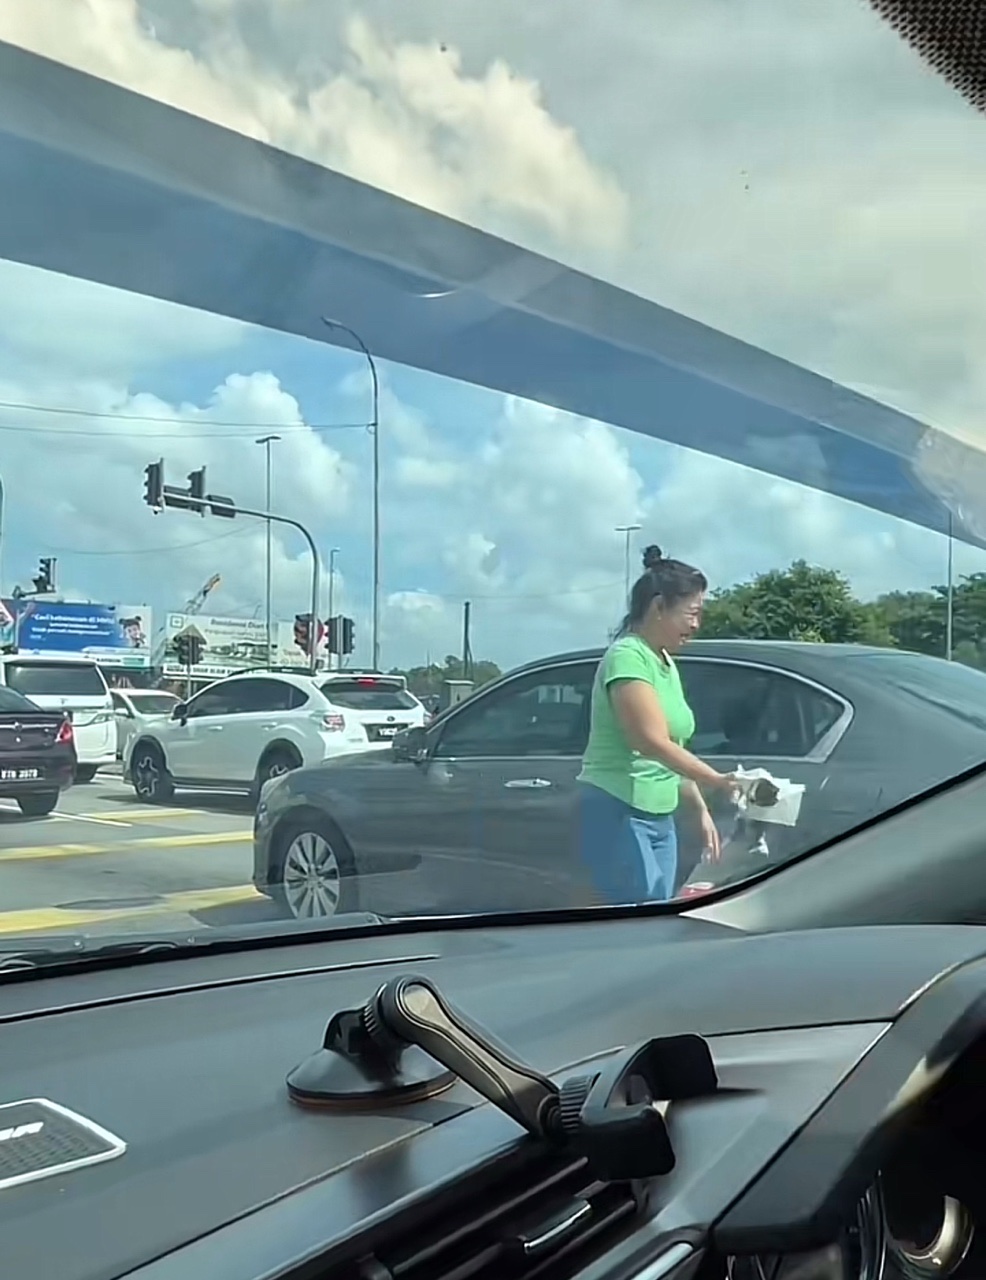 Msian woman bringing the dead cat to her car bonnet